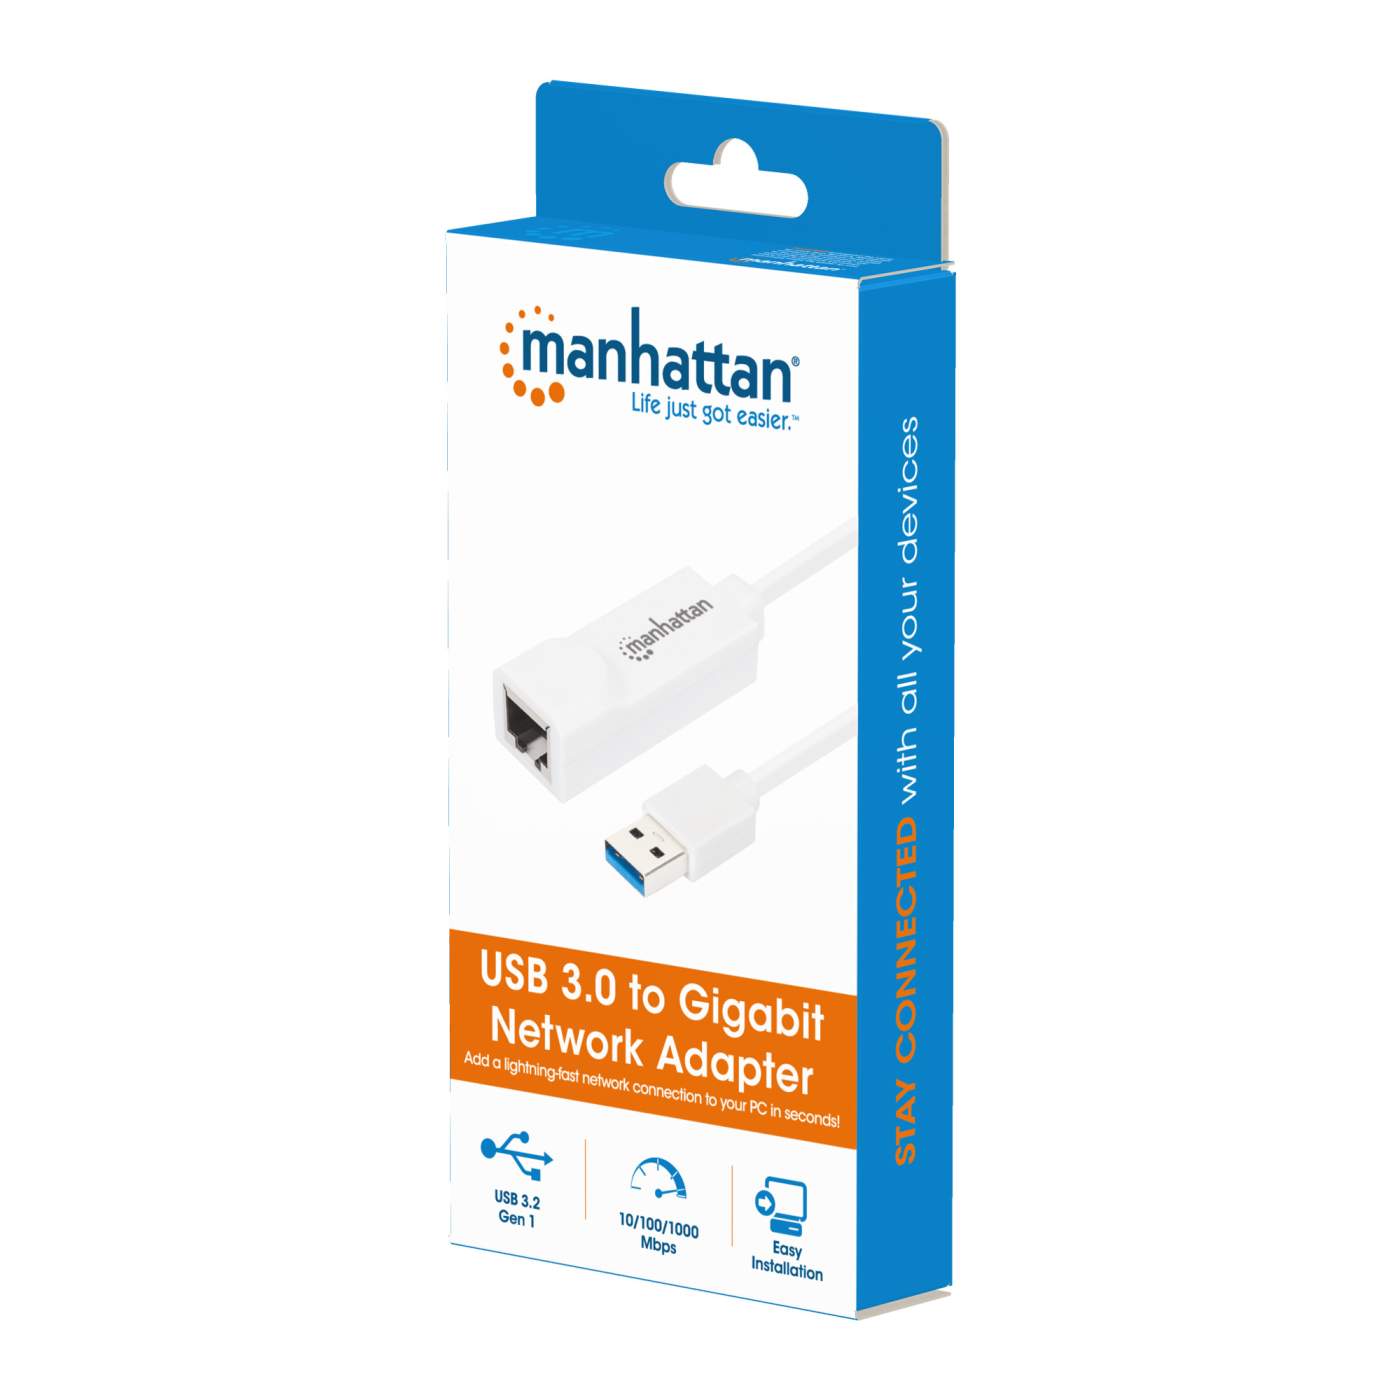 USB 3.0 to Gigabit Ethernet Network Adapter, 10/100/1000 Mbps, USB to RJ45,  USB 3.0 to LAN Adapter, USB 3.0 Ethernet Adapter (GbE), TAA Compliant